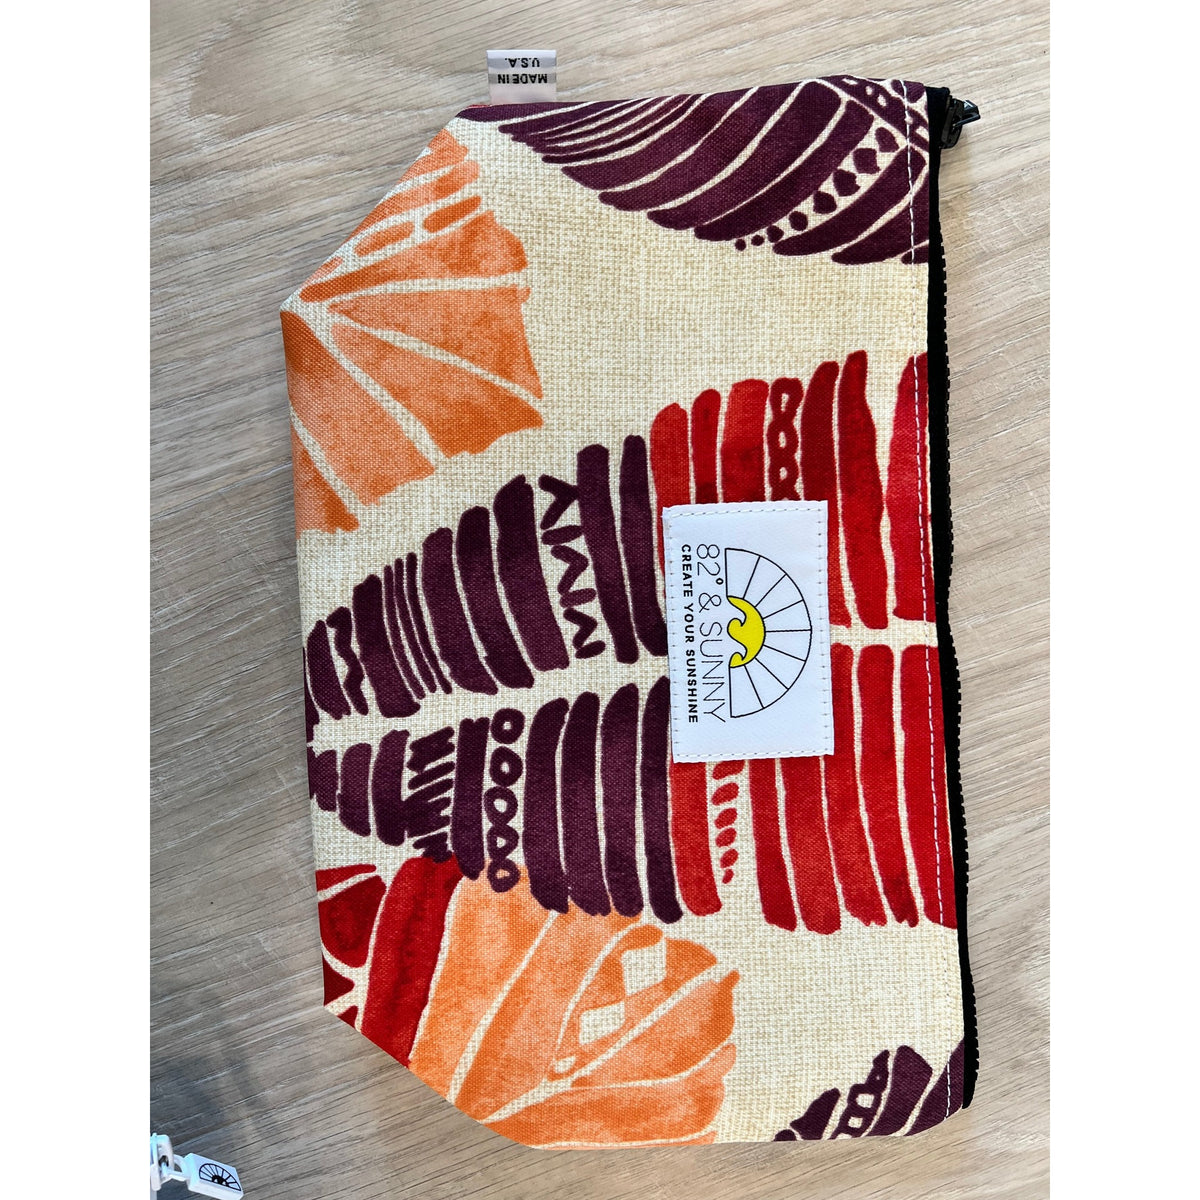 Waterproof Makeup Bag- Locally Made - SLATE Boutique & Gifts